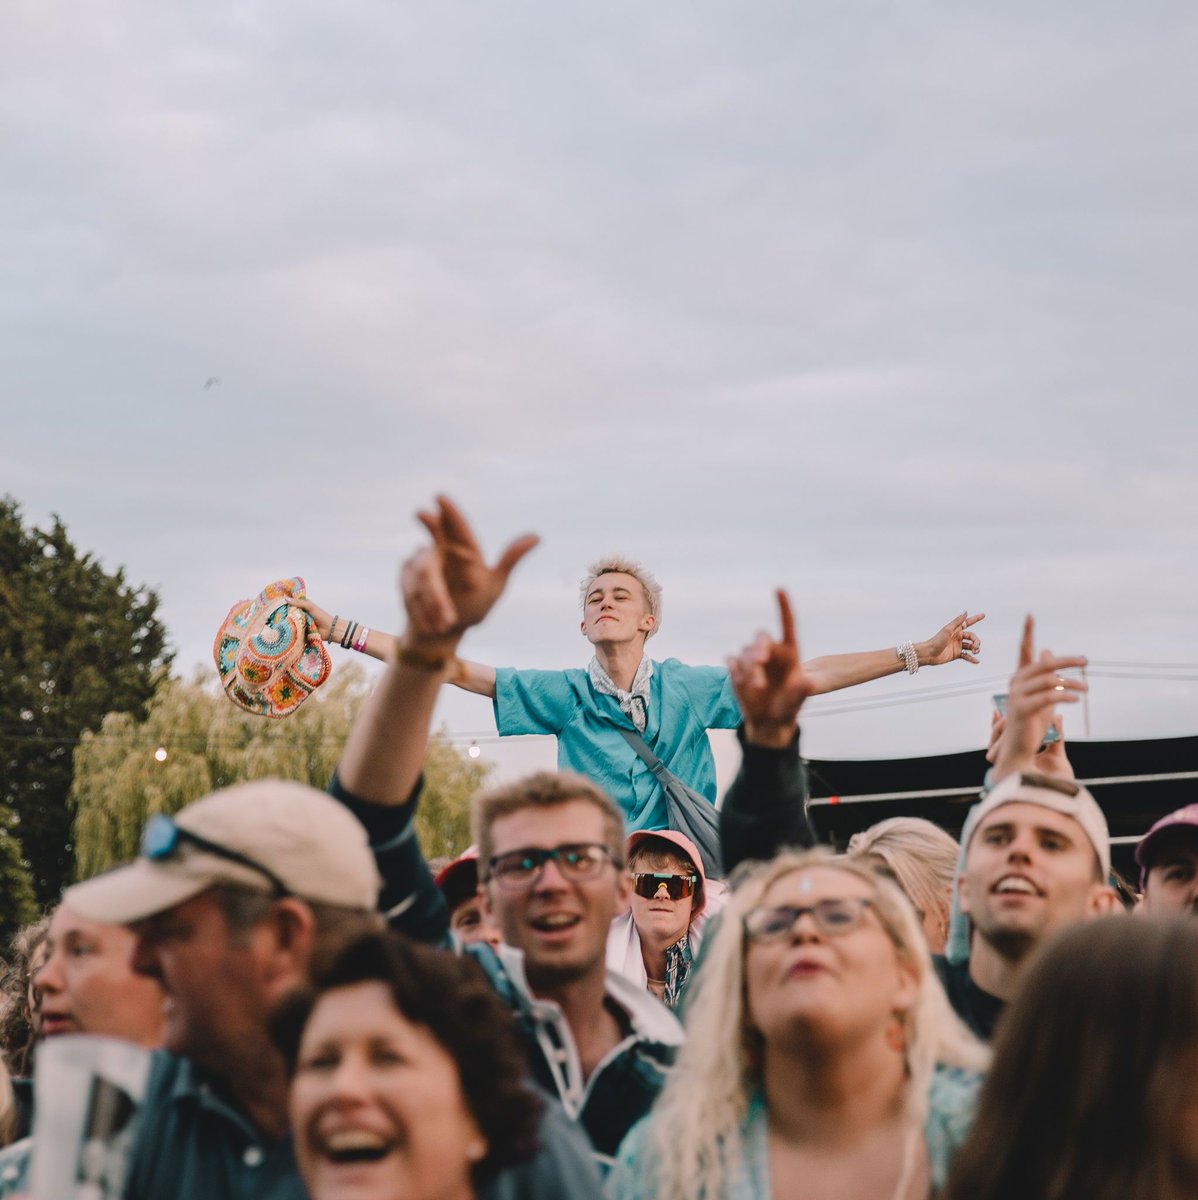 Barn on the Farm is officially the Best Small Festival in the UK - thanks to each and every one of you that makes it so amazing. We'll make up for lost time at Barn 25 and celebrate the way only we can ⚡ More info about tickets is coming very soon!! buff.ly/3u7OryV